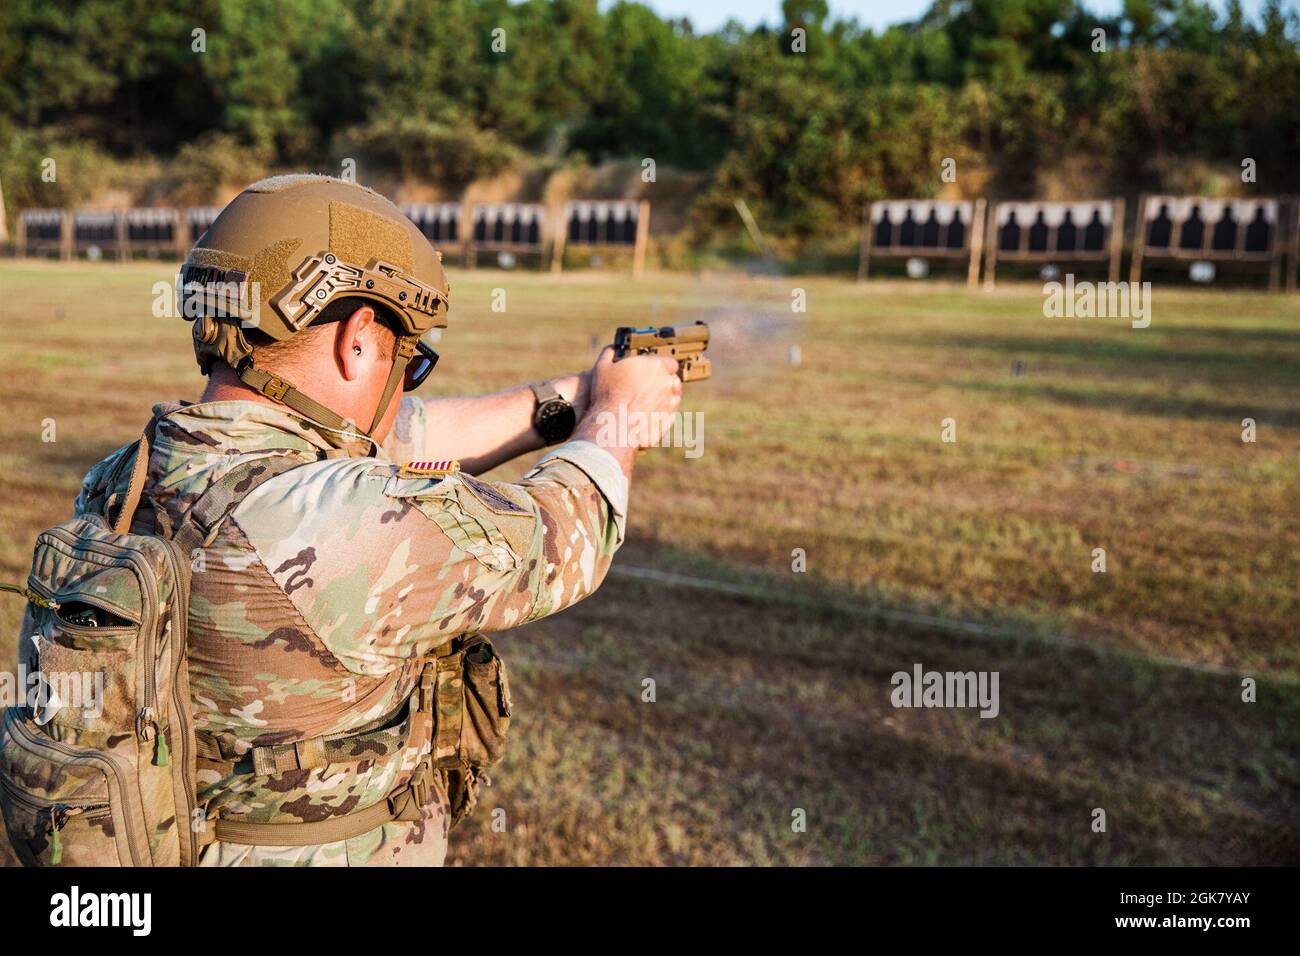 U.S. Staff Sgt. John Jordan, South Carolina National Guard, fires his Pistol during Combat Pistol Excellence-in-Competiton match on Sept. 1 during the 50th Winston P. Wilson Rifle and Pistol Championships at the National Guard Marksmanship Training Center. The objective of this training event is to promote the growth and development of state level marksmanship training, as well as evaluate individual and collective tasks pertaining to that training. Stock Photo